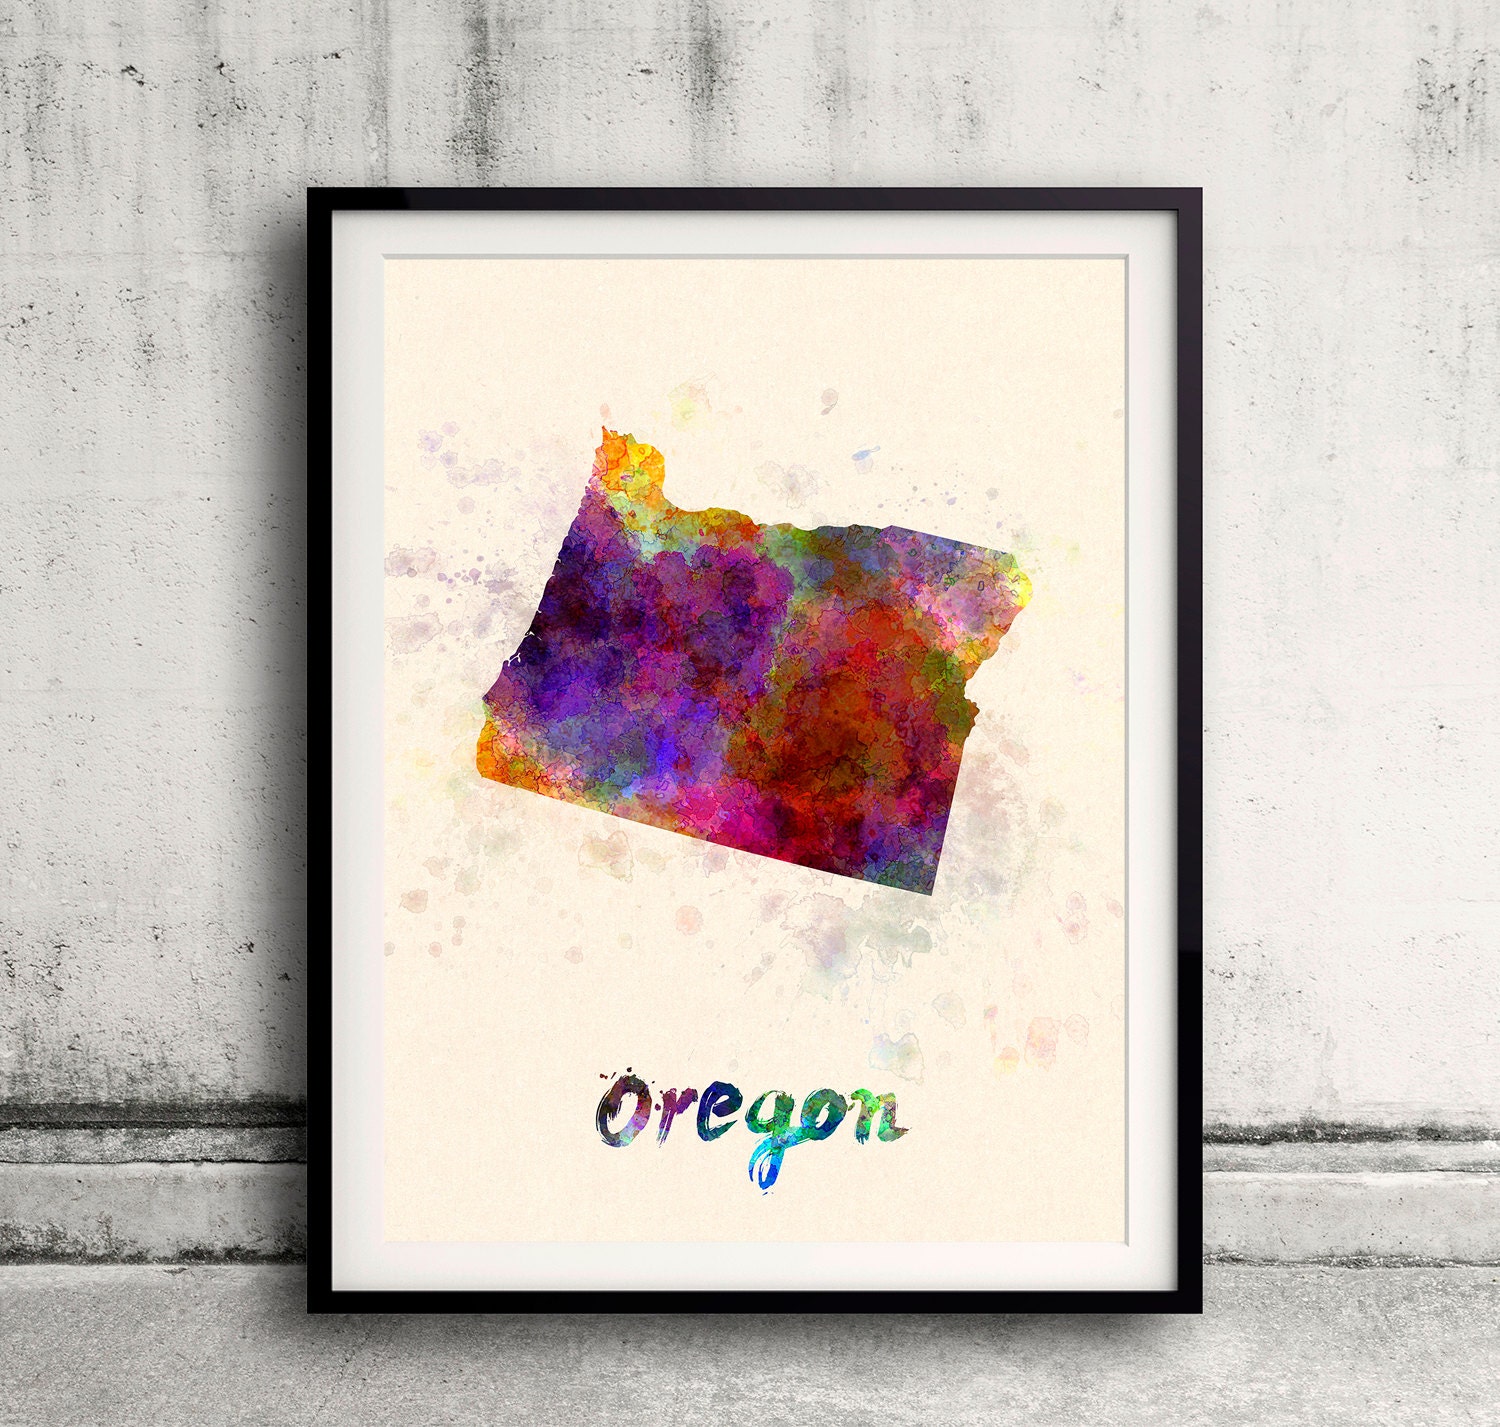 Oregon Us State in Watercolor Background 8x10 In. To 12x16 Poster Digital Wall Art Illustration Print Art Decorative - Sku 0424